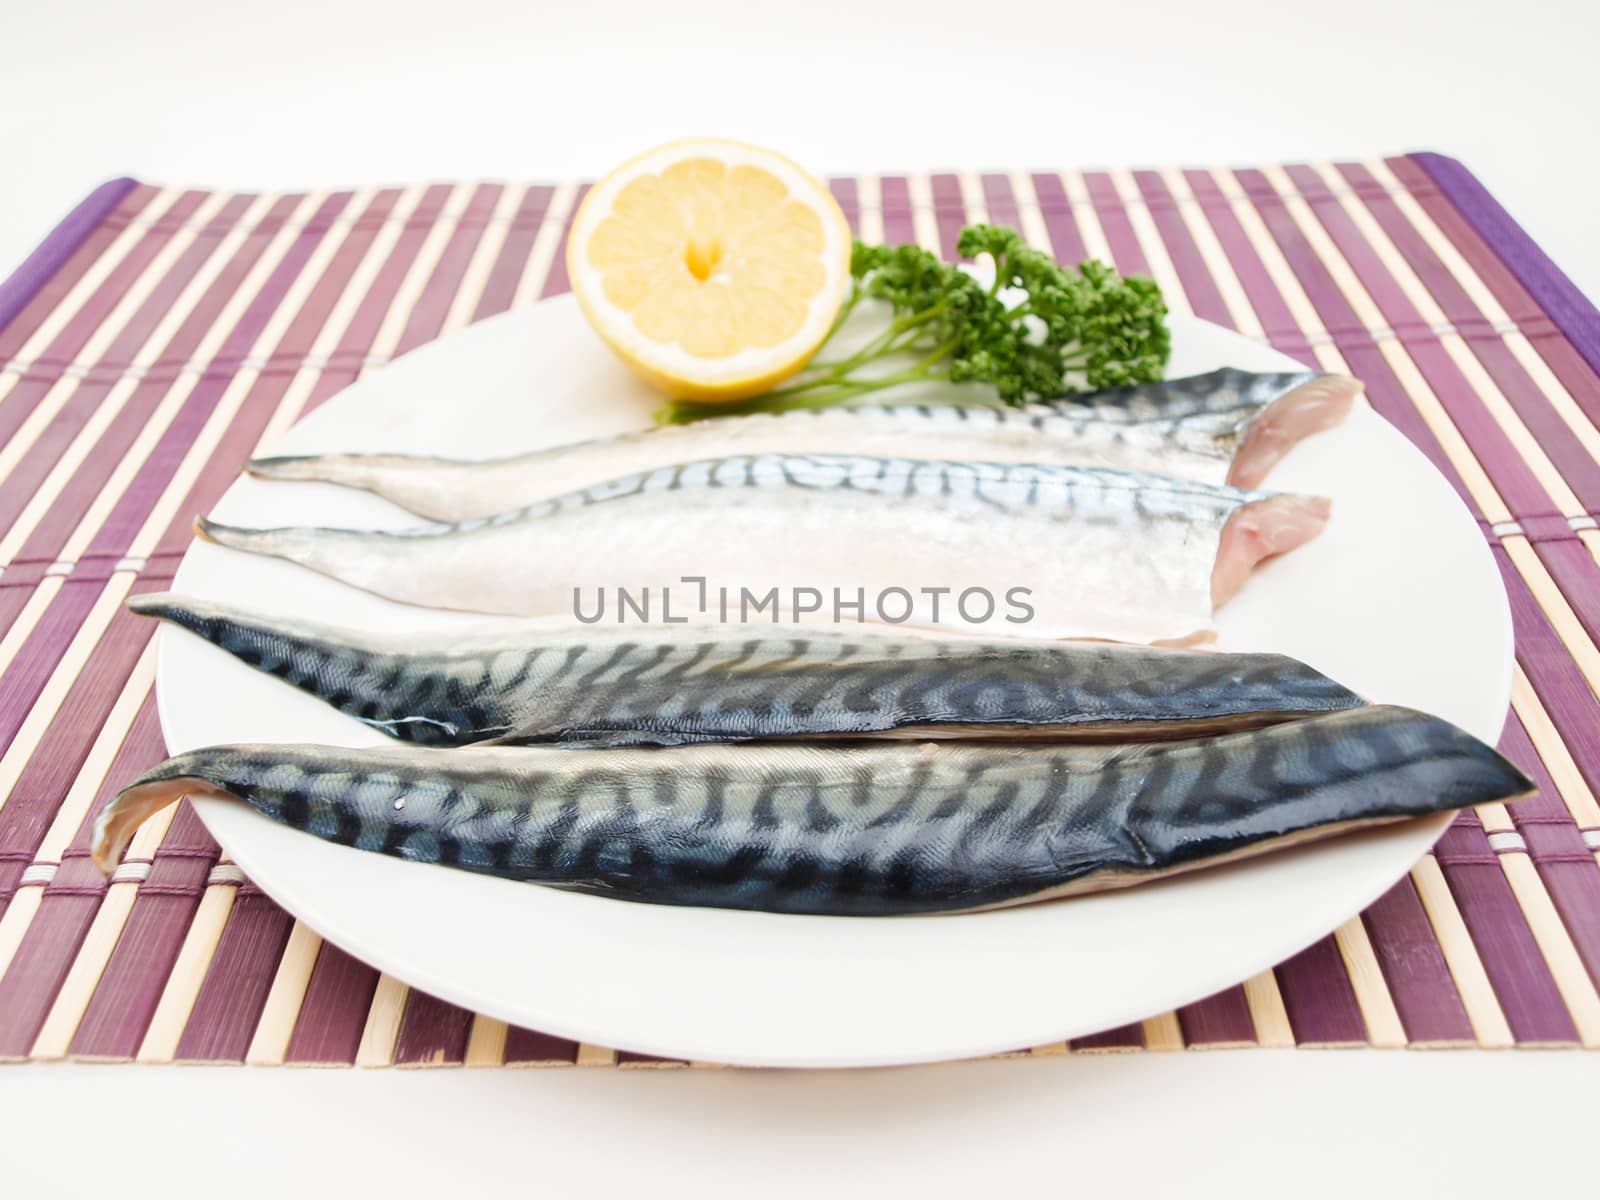 Raw mackerel fish filet with half a lemon and parsley on white plate on purple wooden table cover